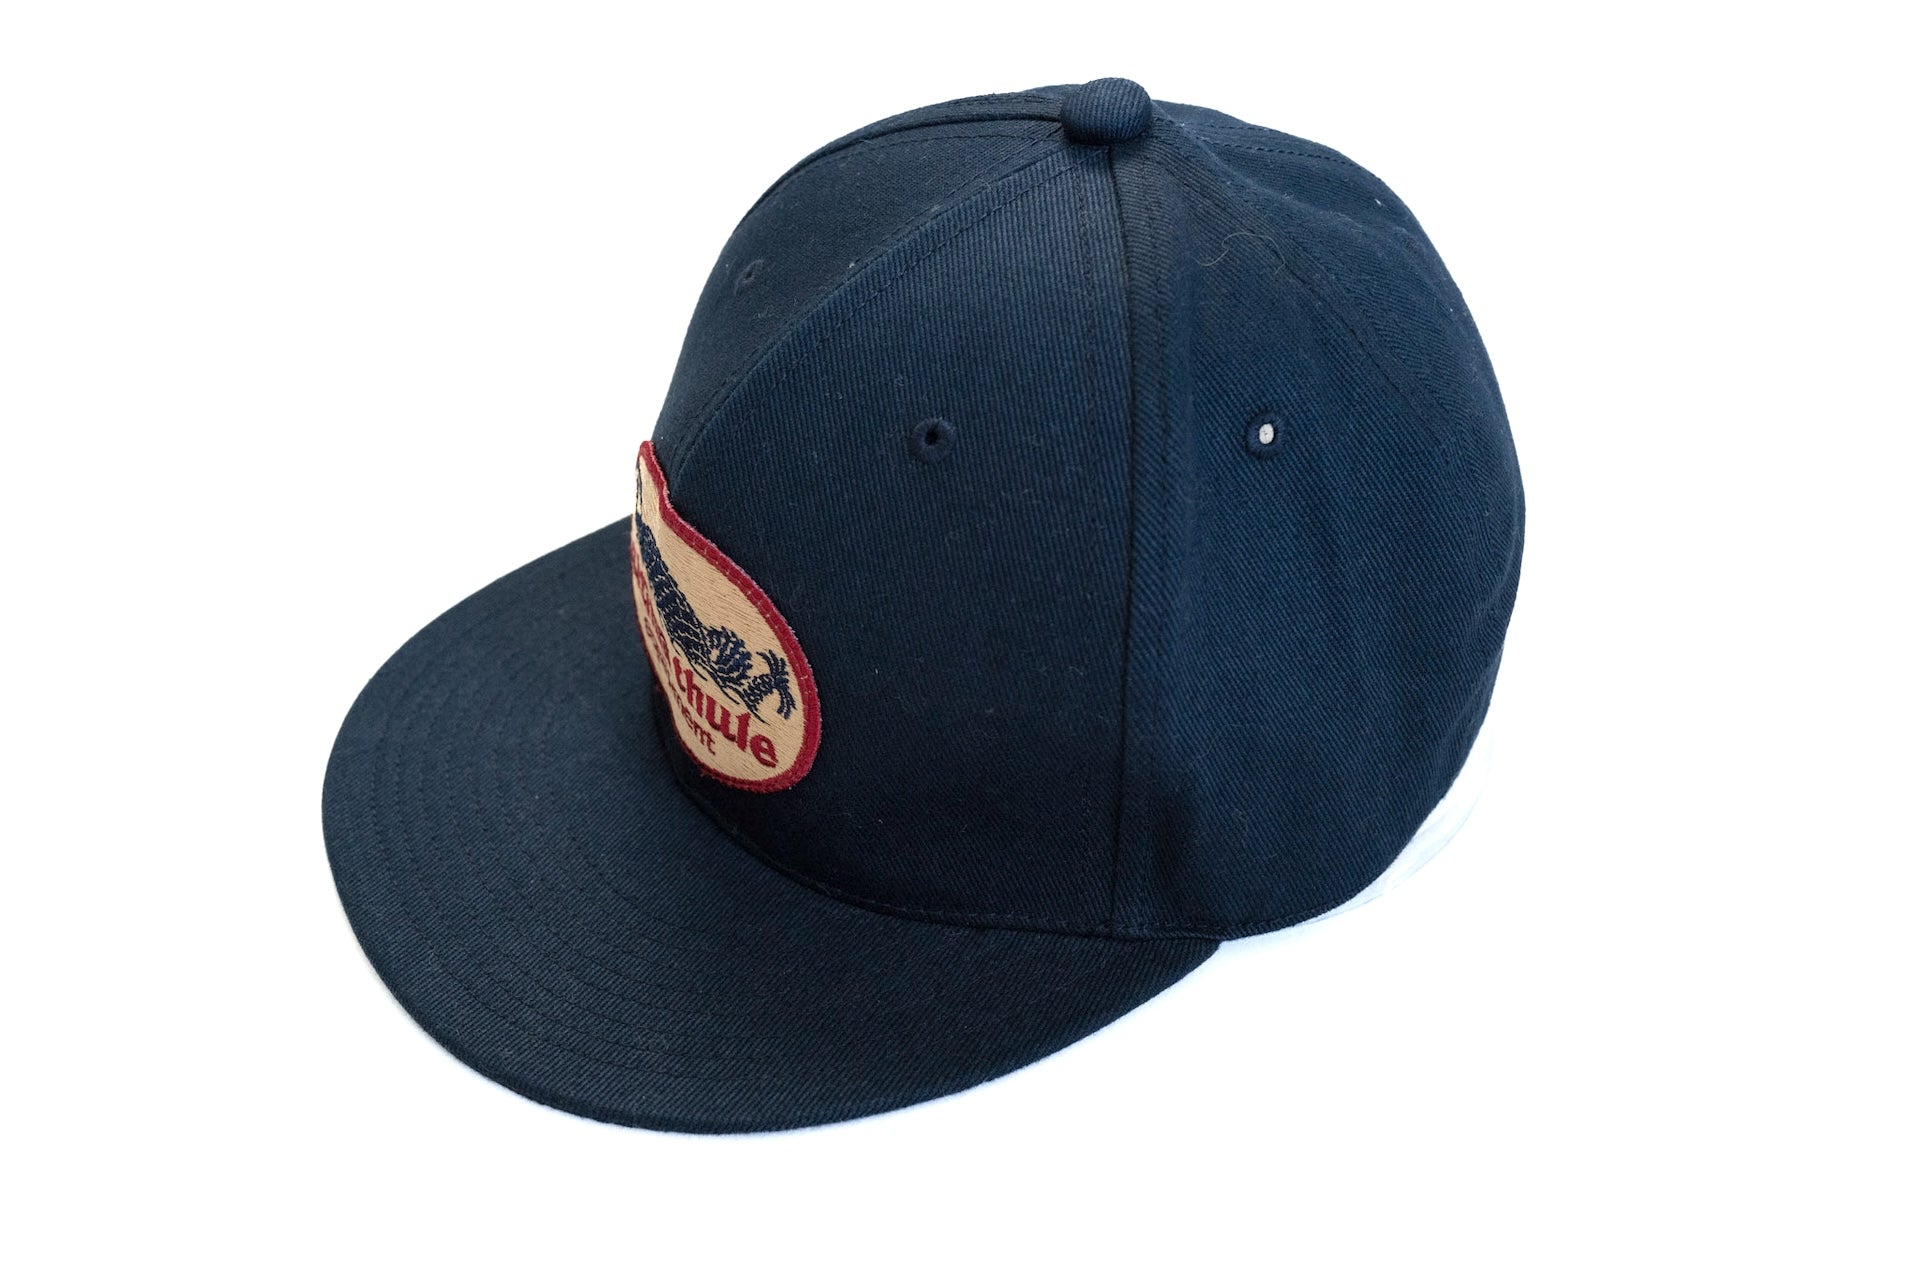 Ultima Thule by Freewheelers "Ancient Monster" Crest Vent Cap (Navy)